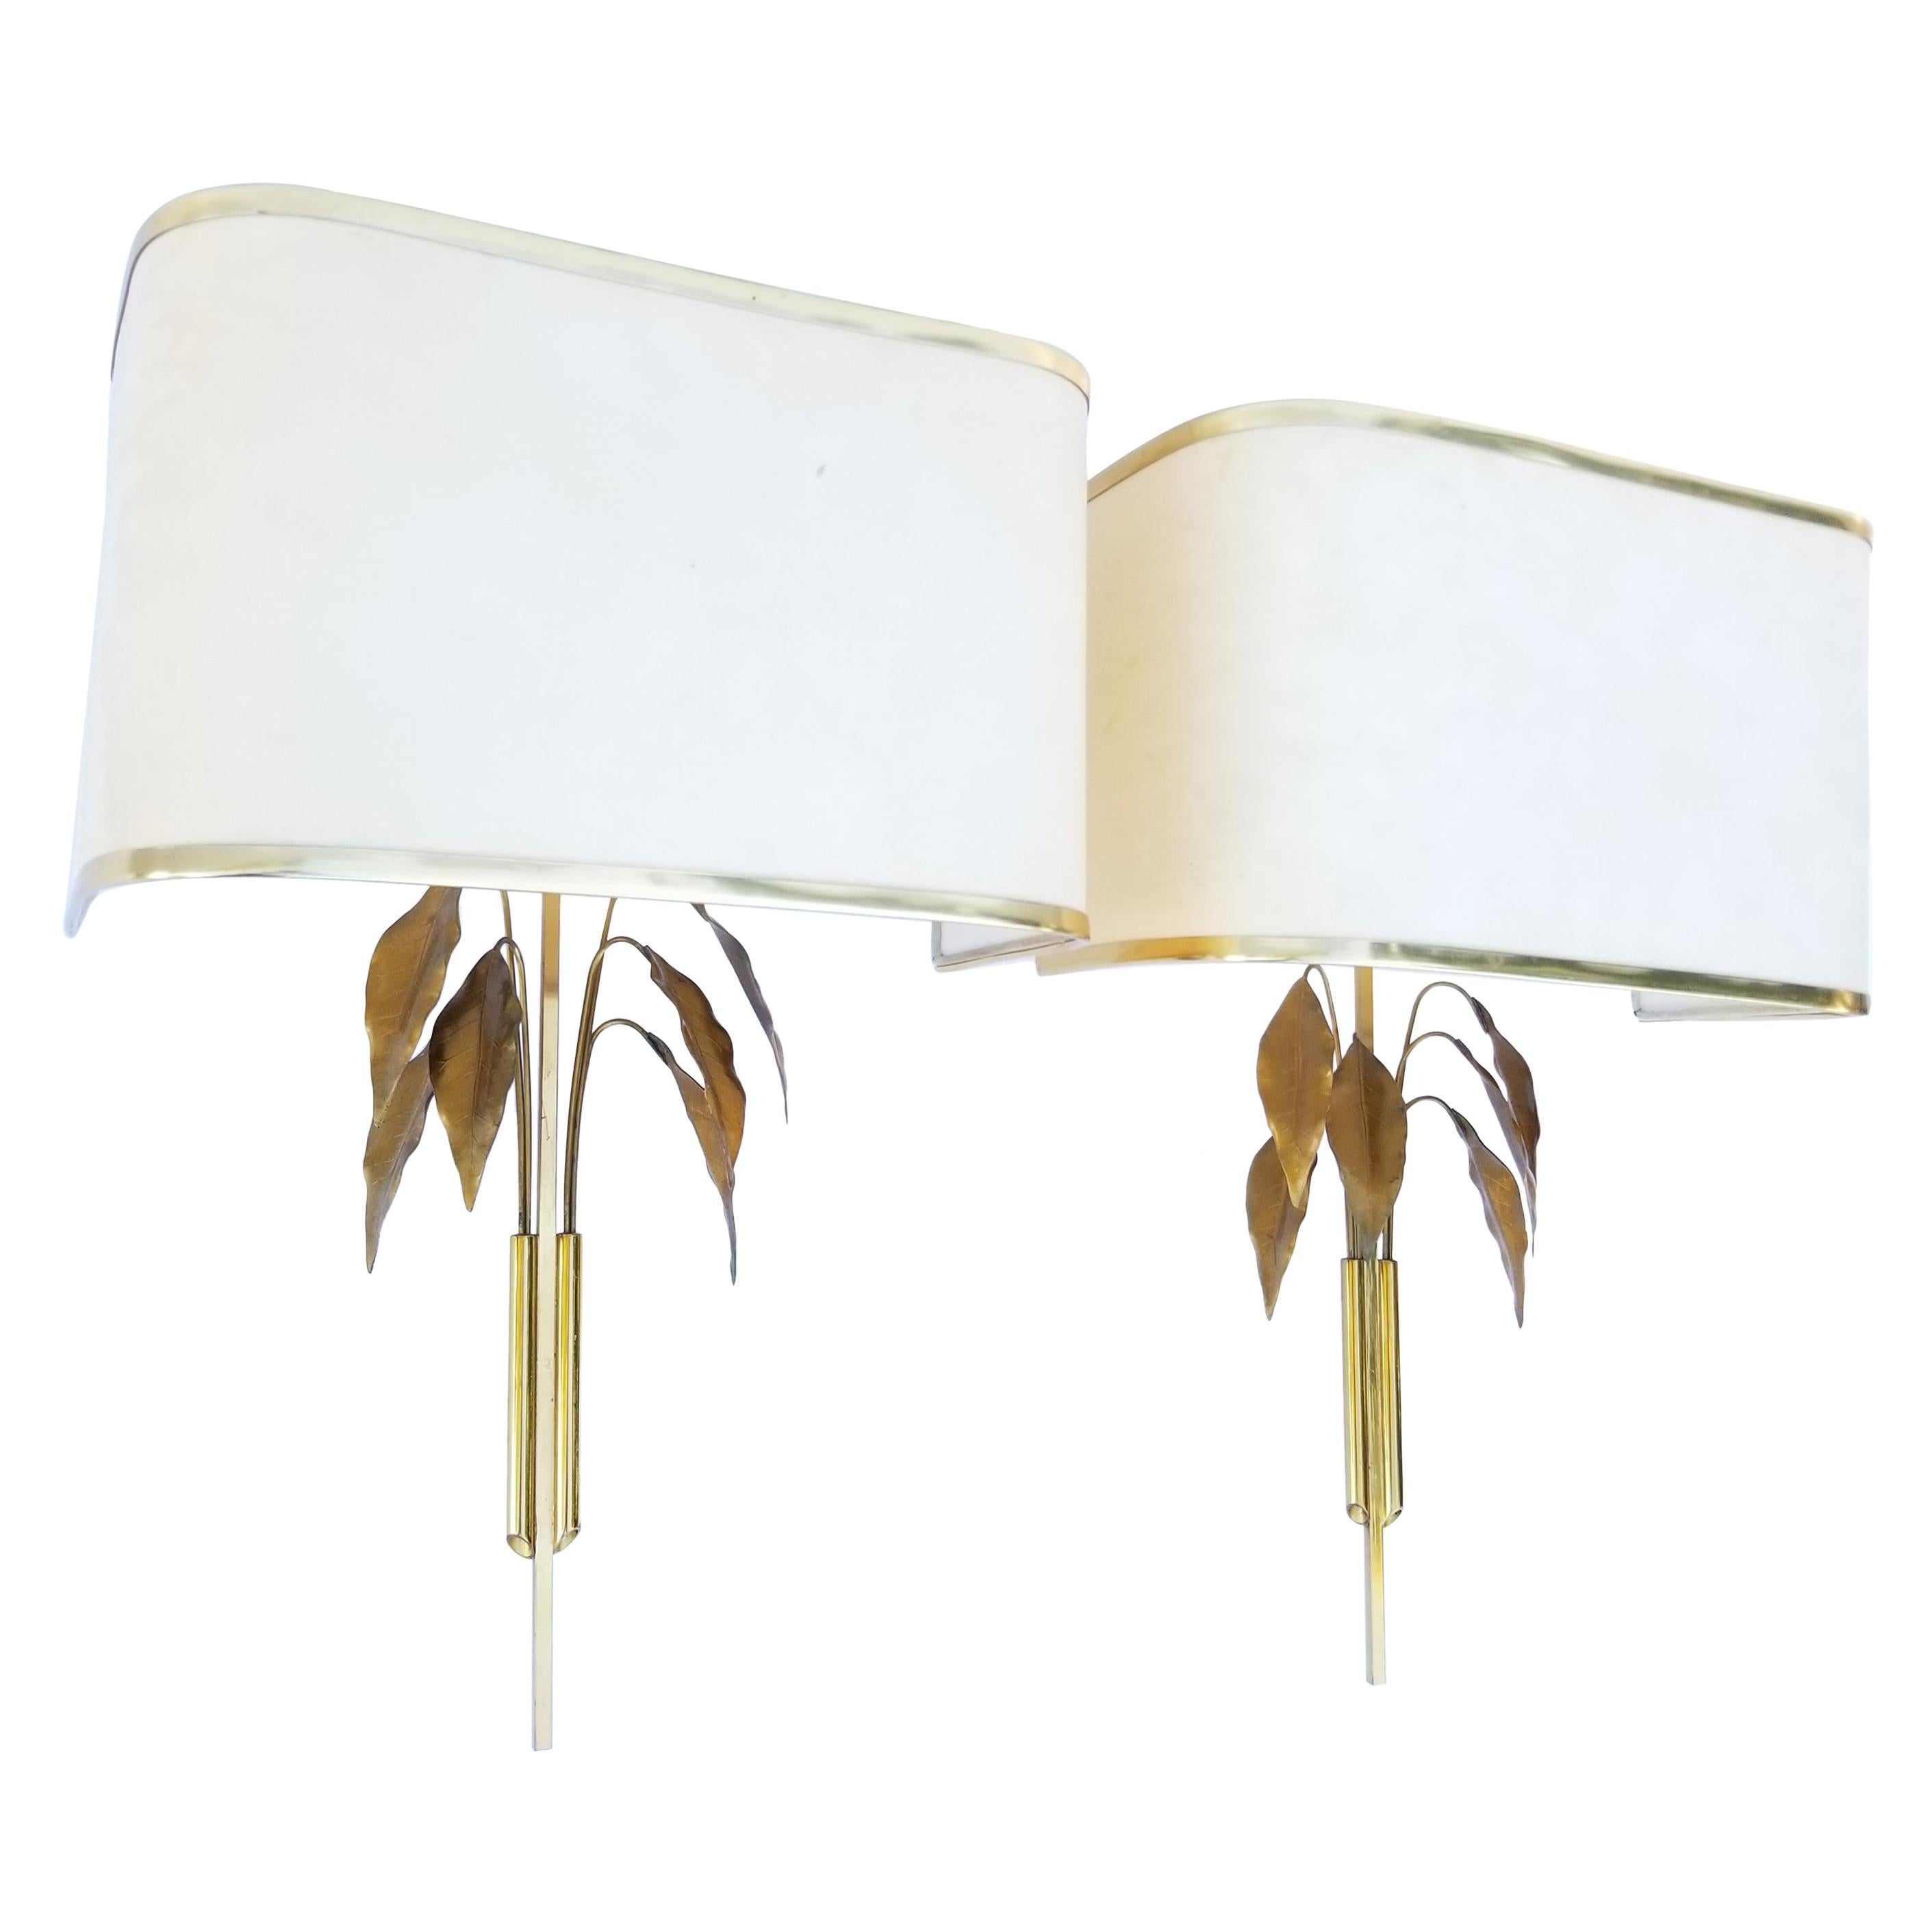 Pair of Maison Charles Style "Feuilles" Sconces